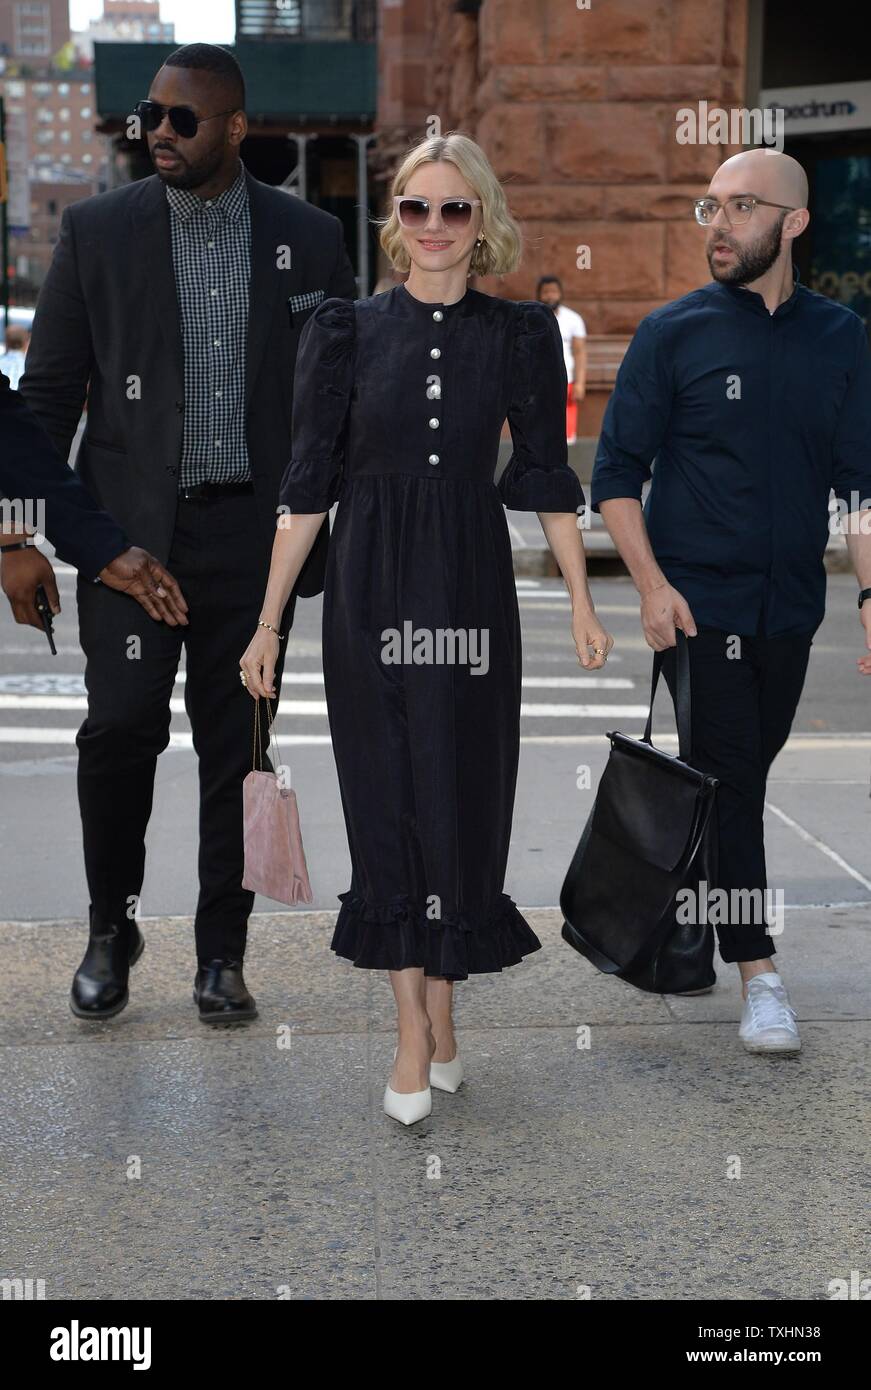 New York, NY, USA. 24th June, 2019. Naomi Watts out and about for Celebrity  Candids - MON, New York, NY June 24, 2019. Credit: Kristin Callahan/Everett  Collection/Alamy Live News Stock Photo - Alamy